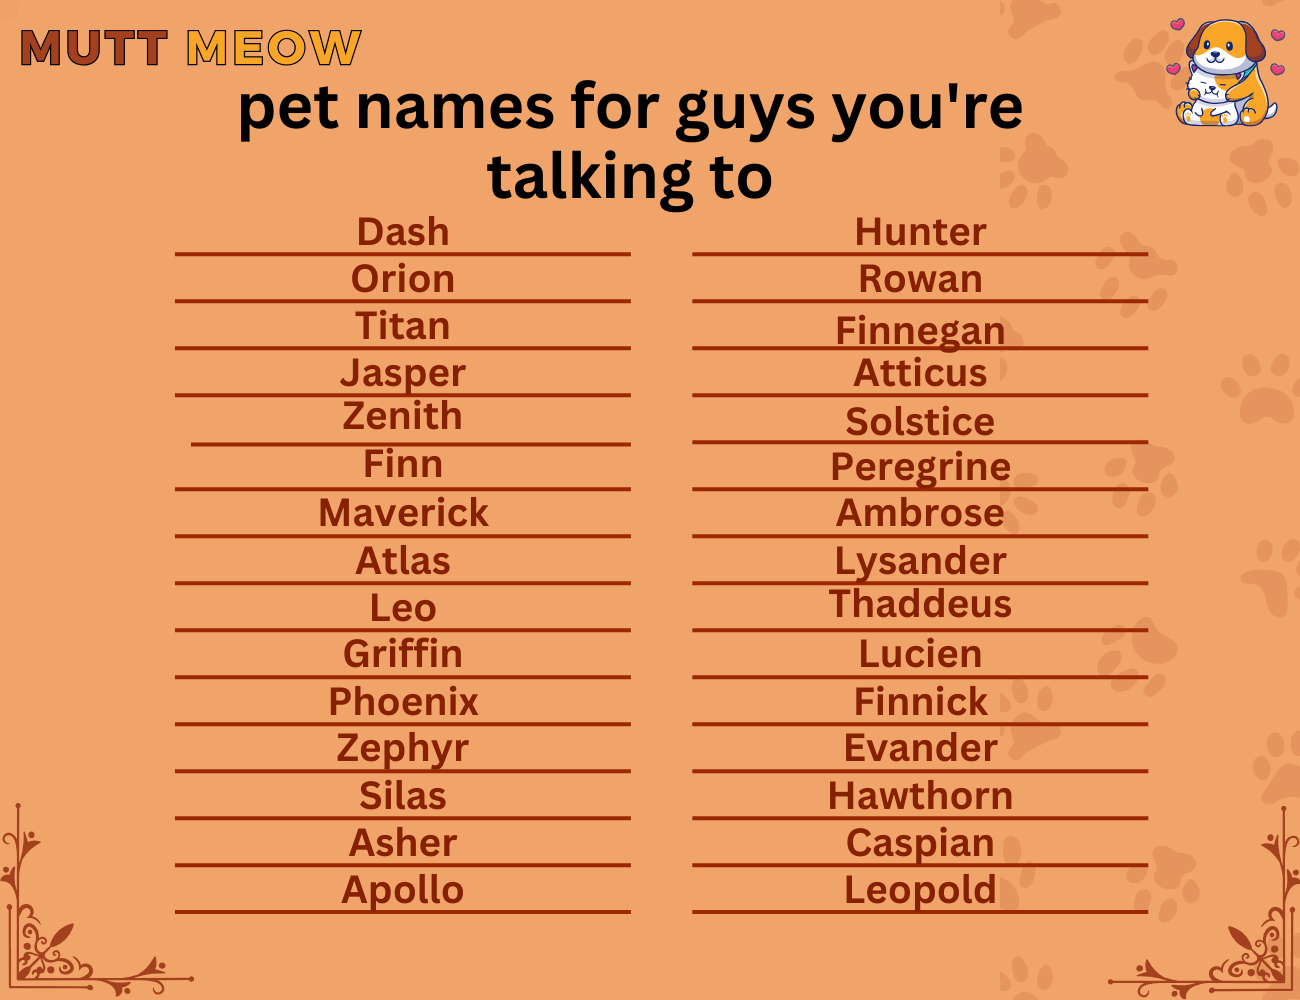 pet names for guys you're talking to